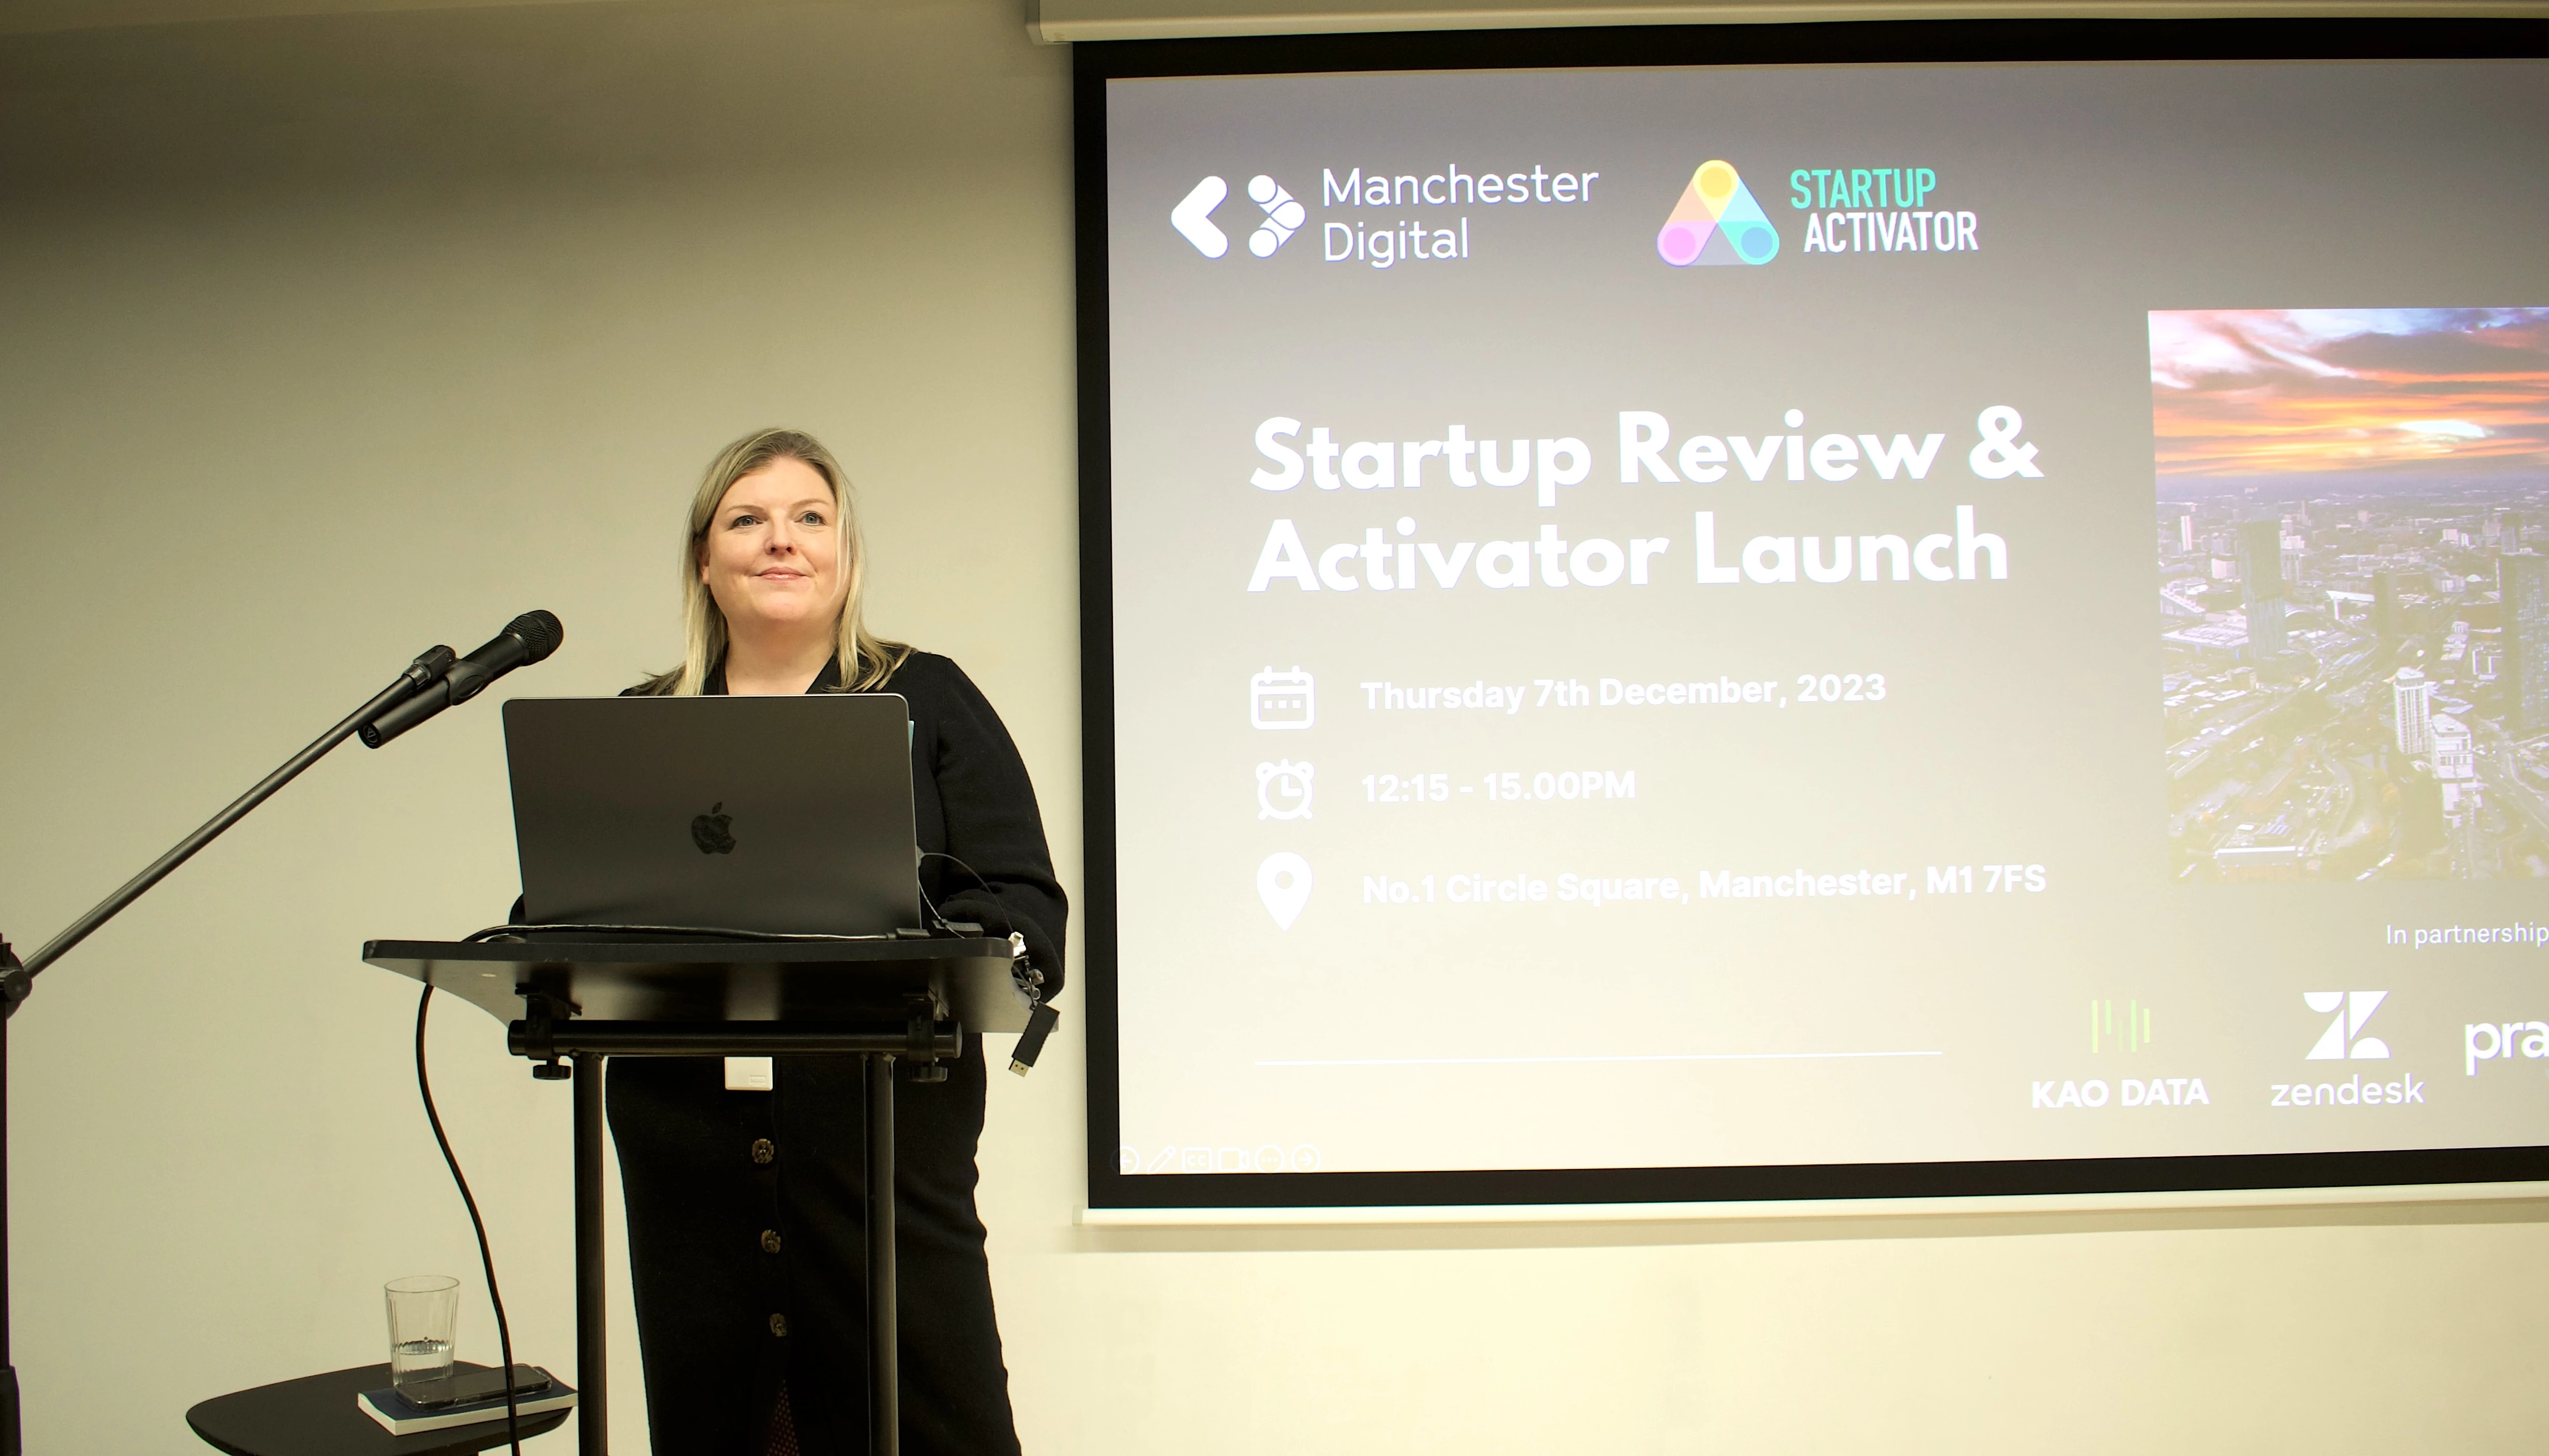 MD Katie Gallagher launches Manchester Digital's new Startup Activator programme